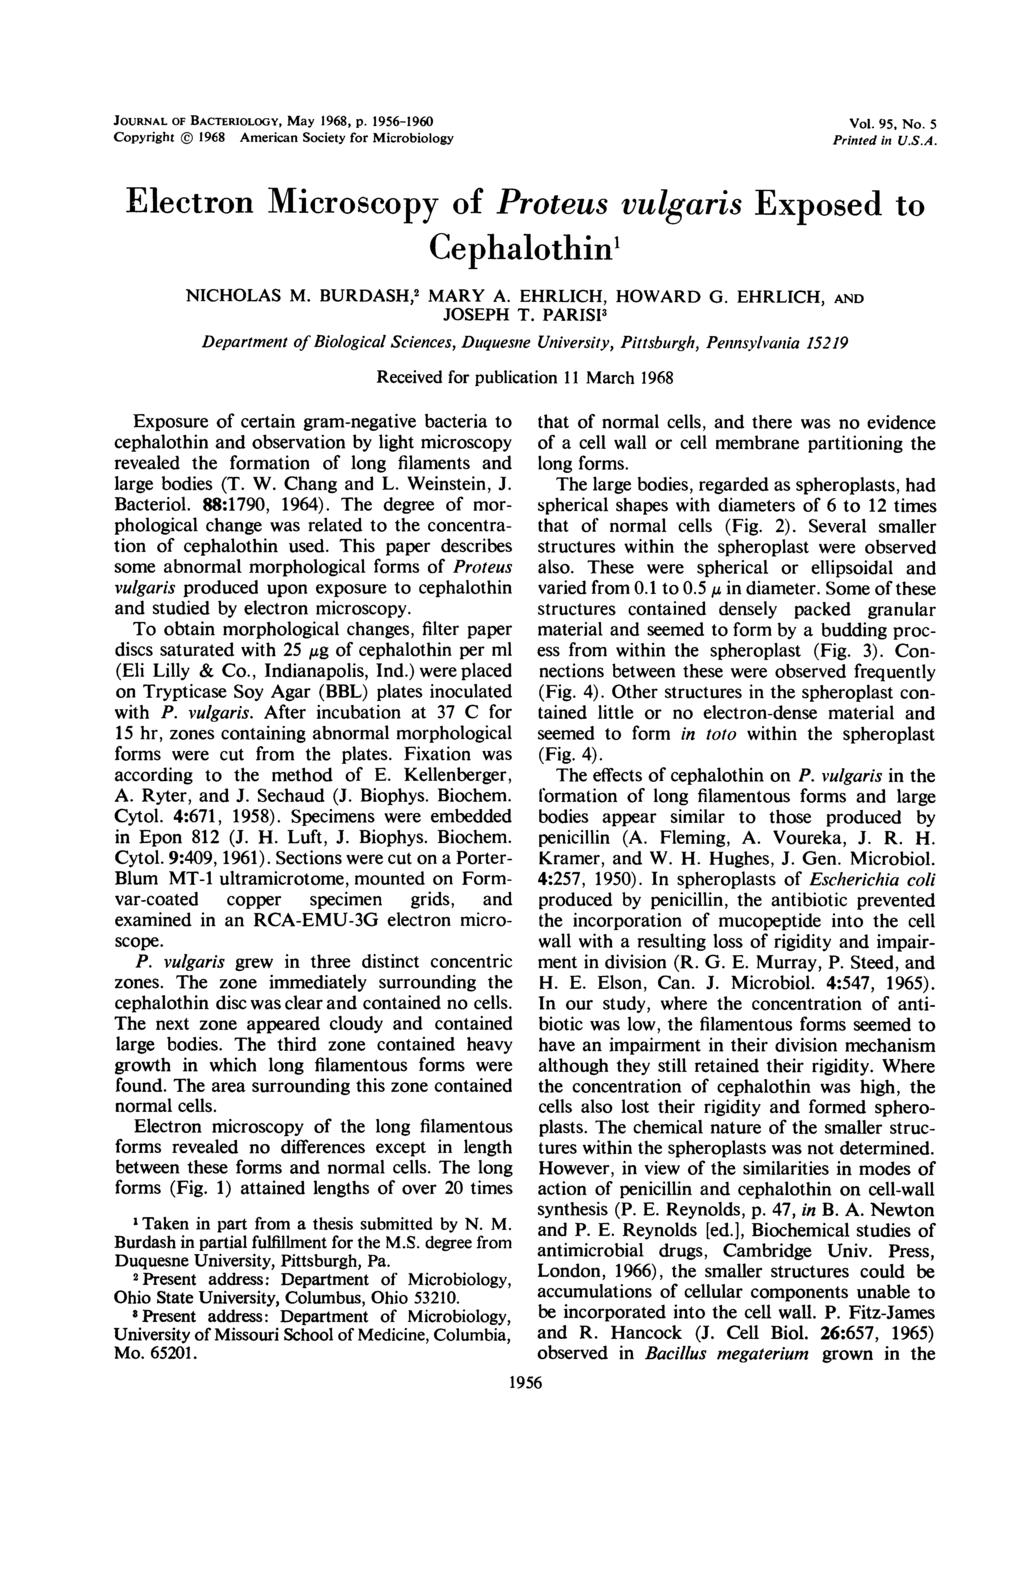 JOURNAL OF BACTERIOLOGY, May 1968, p. 1956-1960 Copyright ( 1968 American Society for Microbiology Vol. 95, No. 5 Printed in U.S.A. Electron Microscopy of Proteus vulgaris Exposed to Cephalothin' NICHOLAS M.